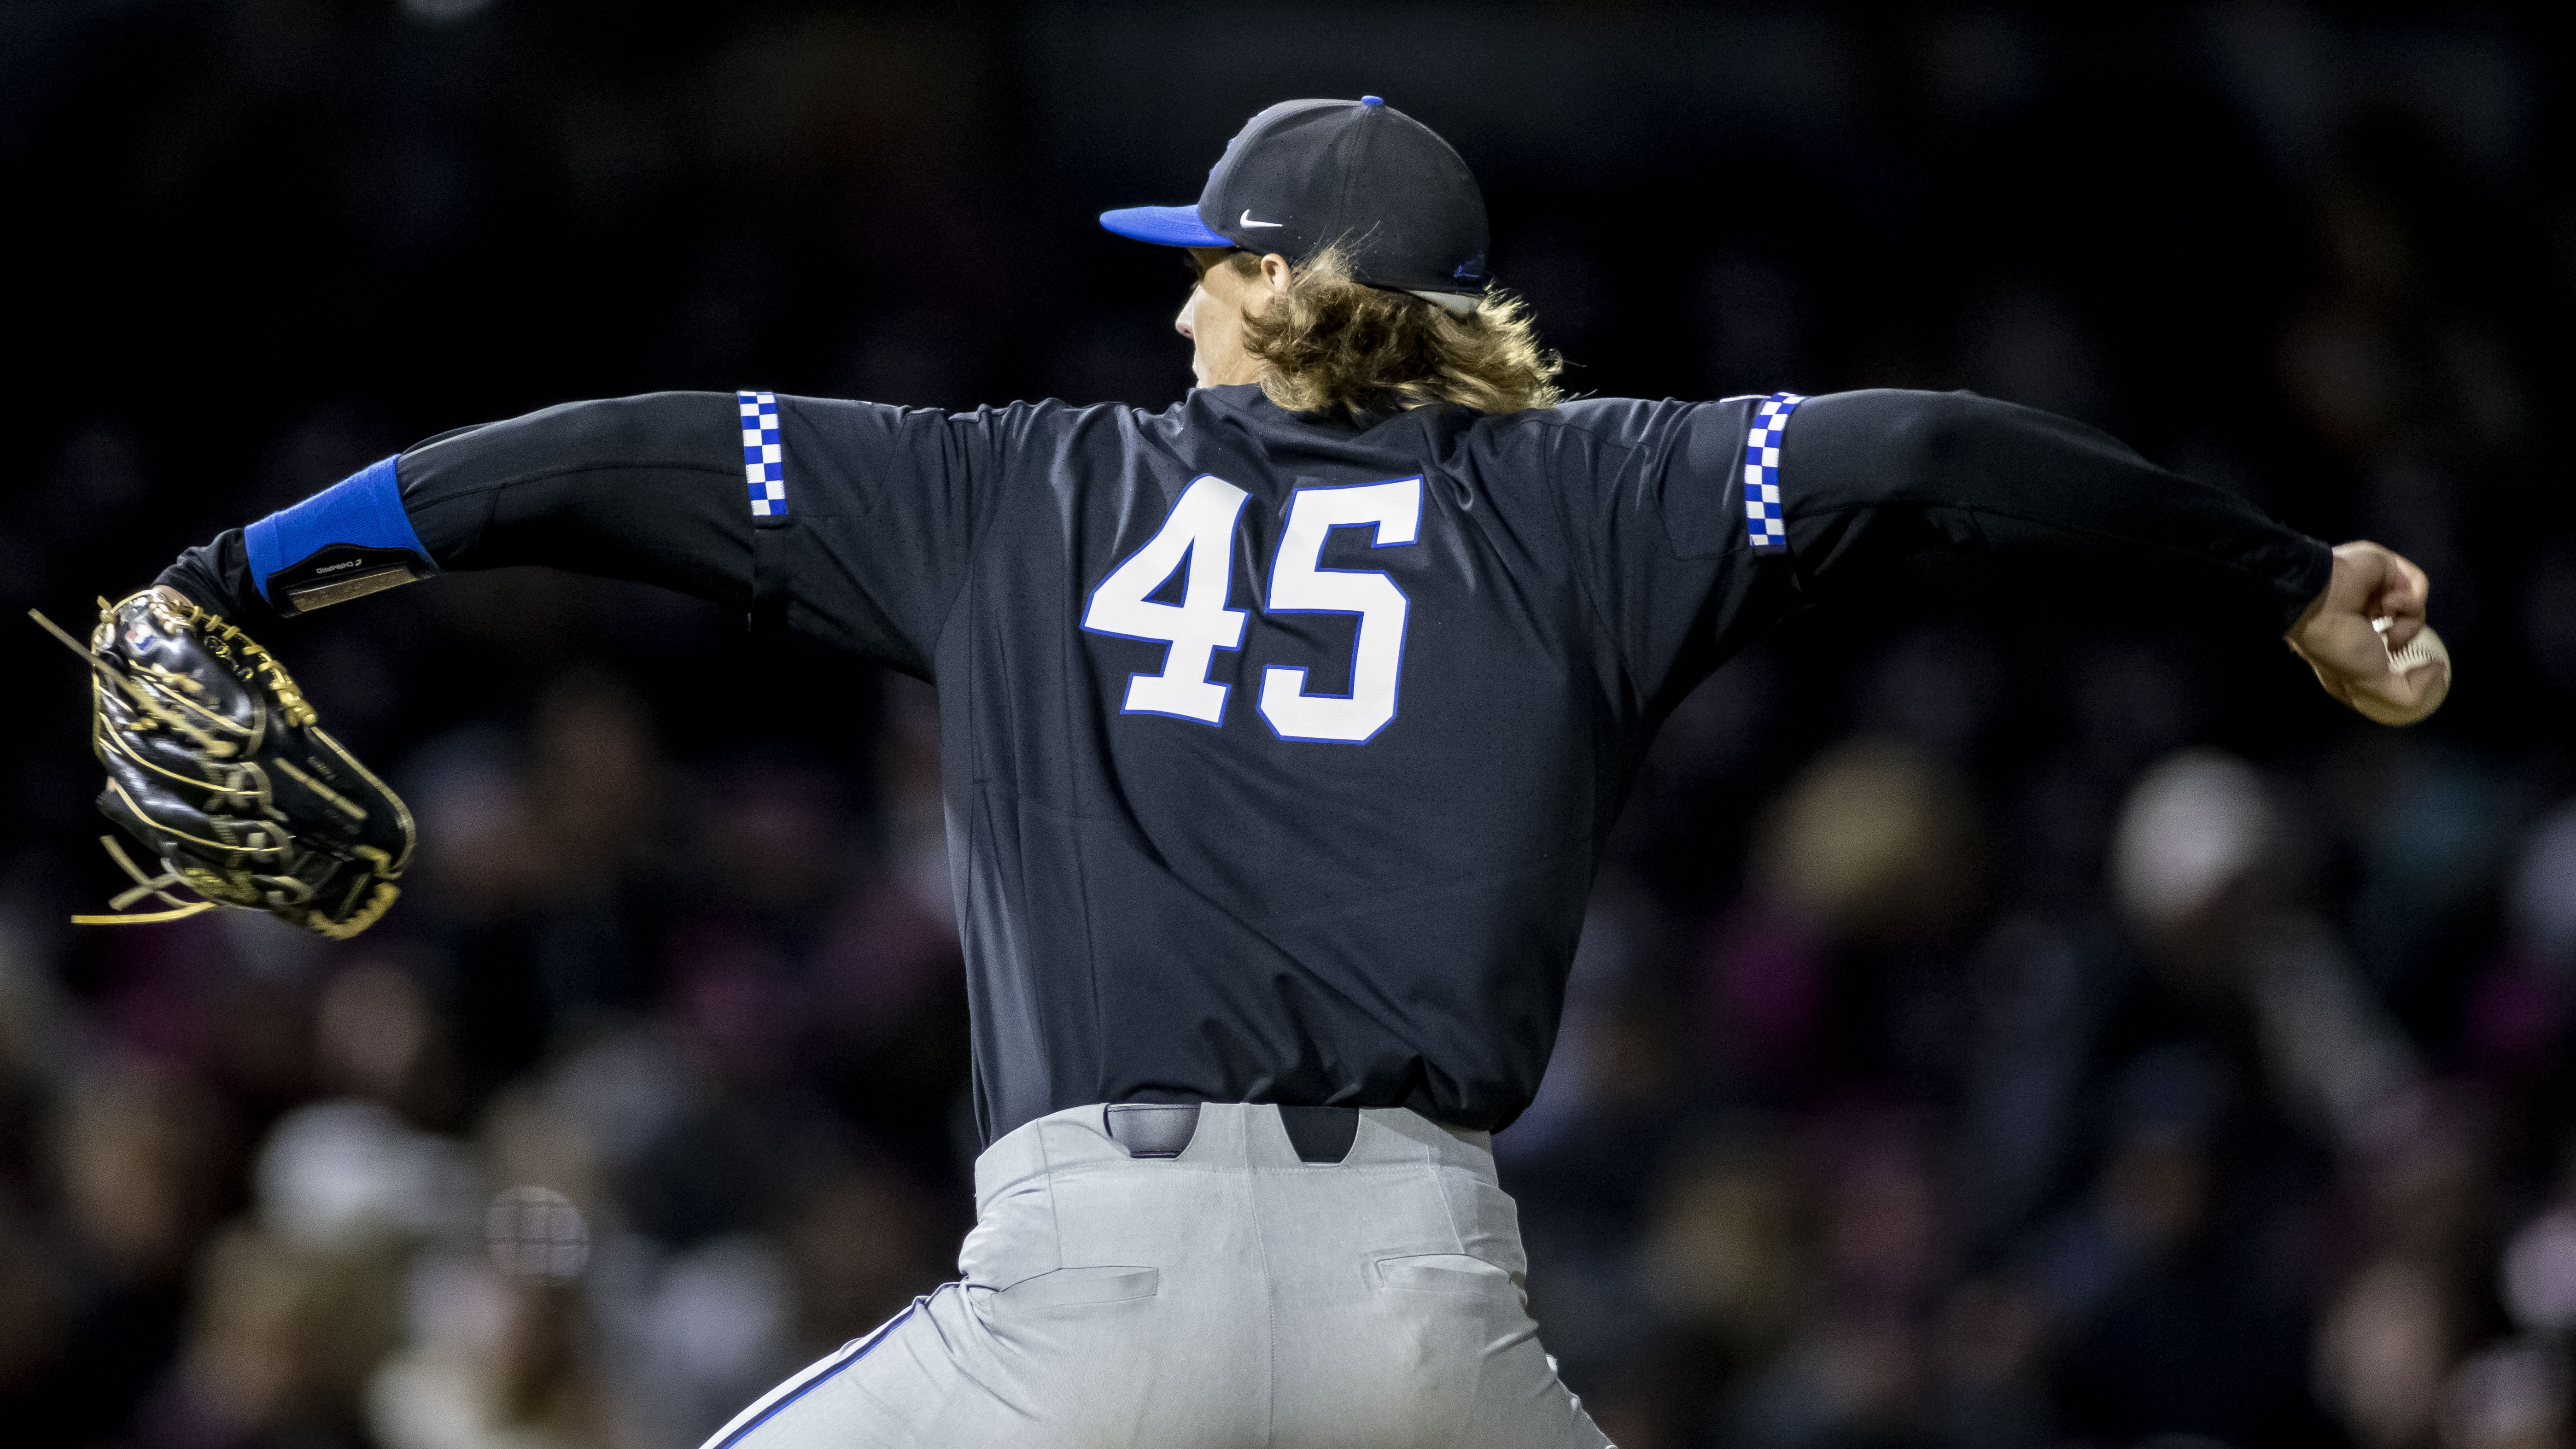 Holt Jones Selected in 14th Round of 2021 MLB Draft – UK Athletics